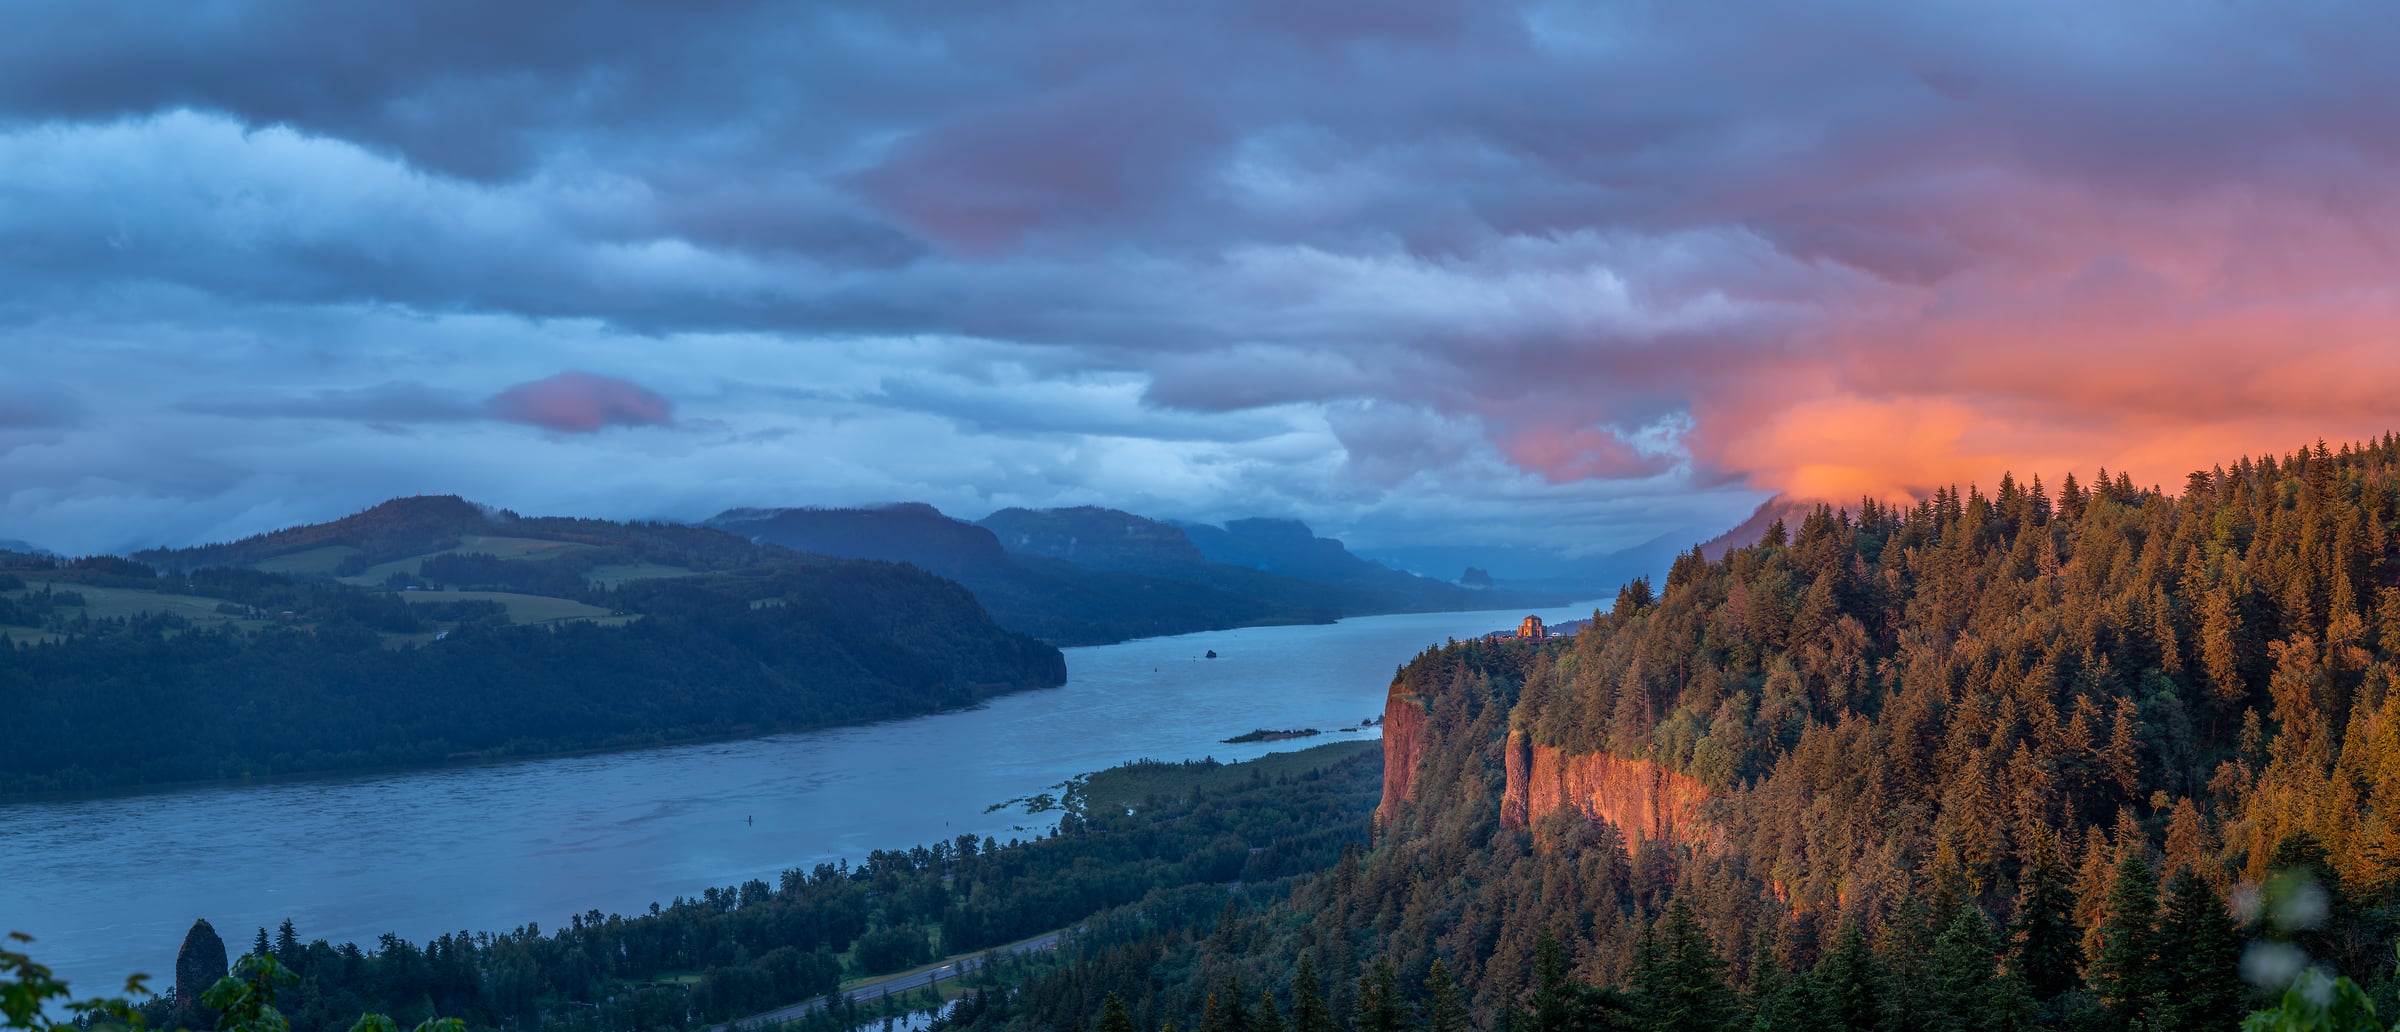 342 megapixels! A very high resolution, large-format VAST photo print of the Columbia River Gorge at sunset; landscape photograph created by Greg Probst in Columbia River Gorge National Scenic Area, Washington and Oregon